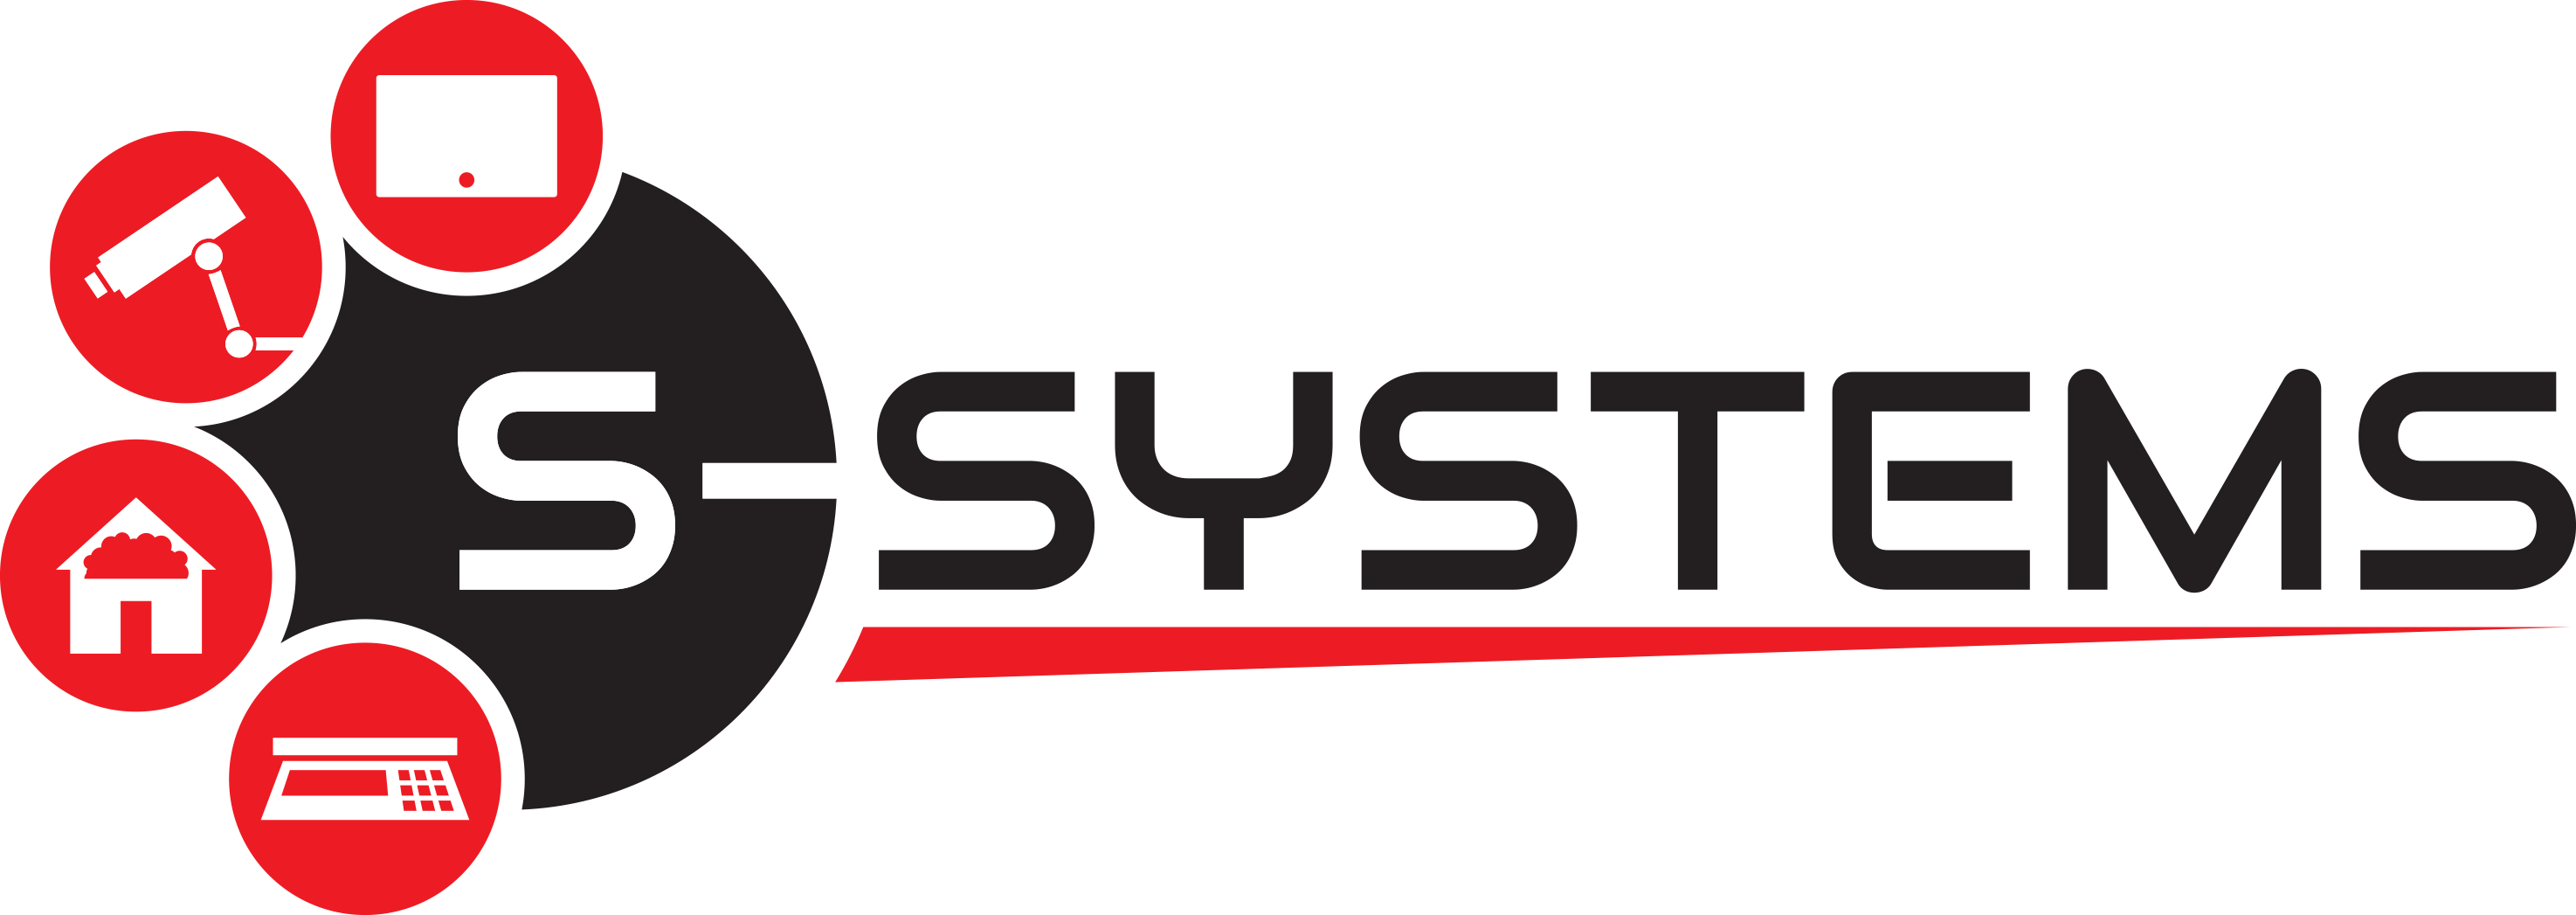 S-systems